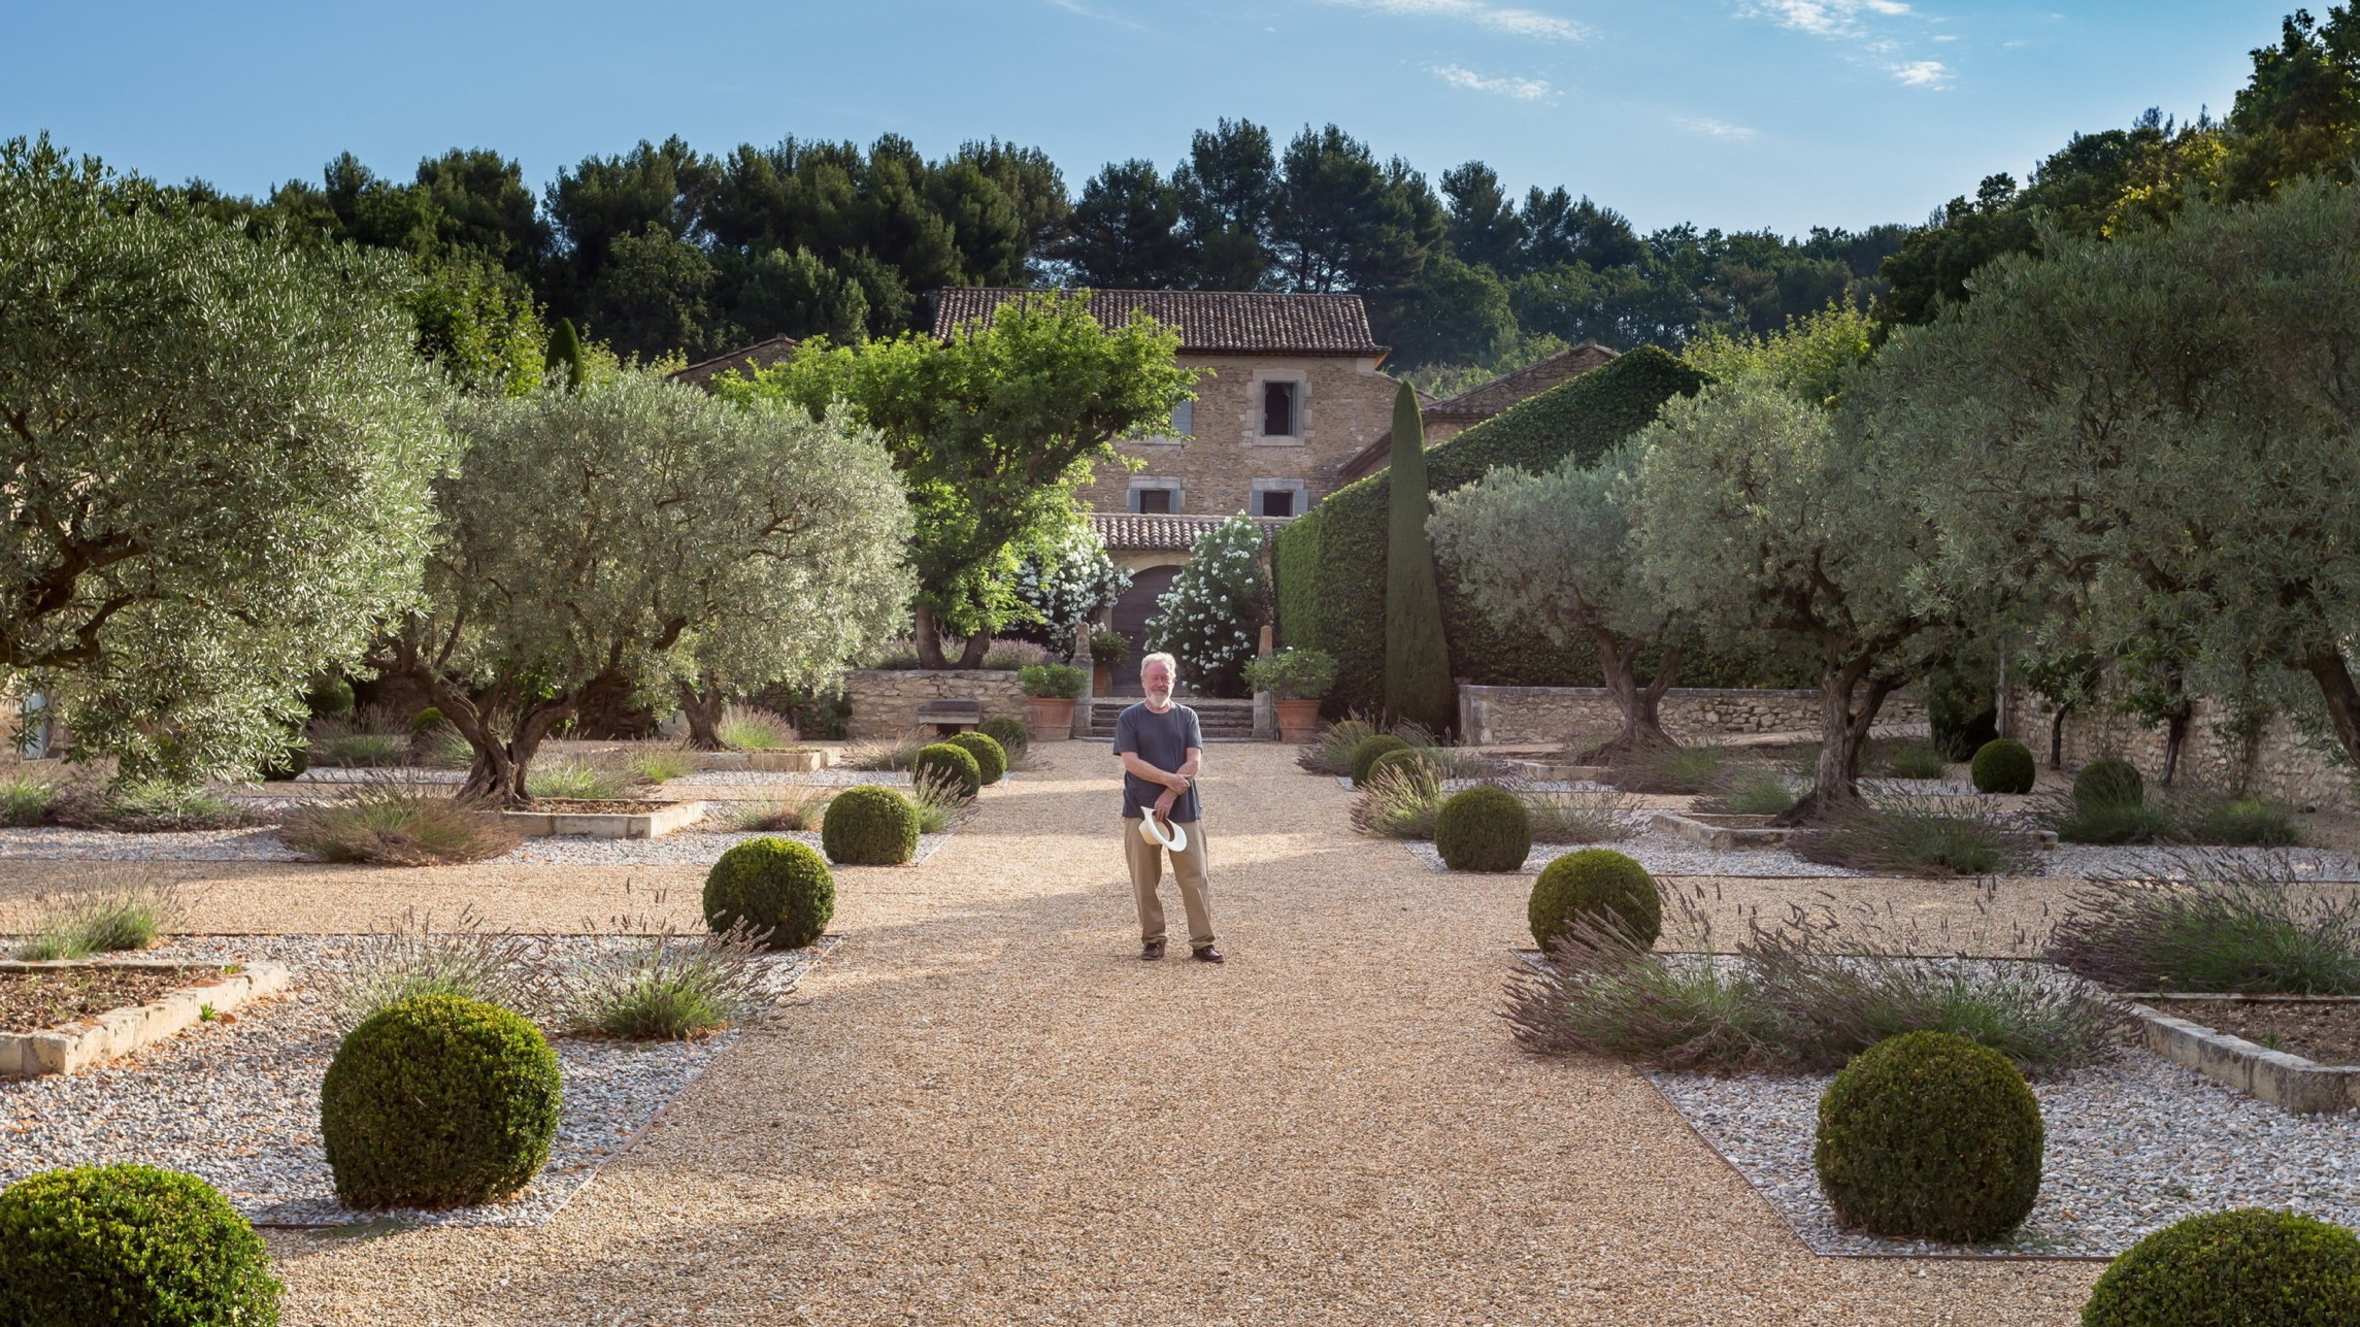 Ridley Scott, with grey hair and beard, holding a hat, stands smiling in the gardens of a large house in the country